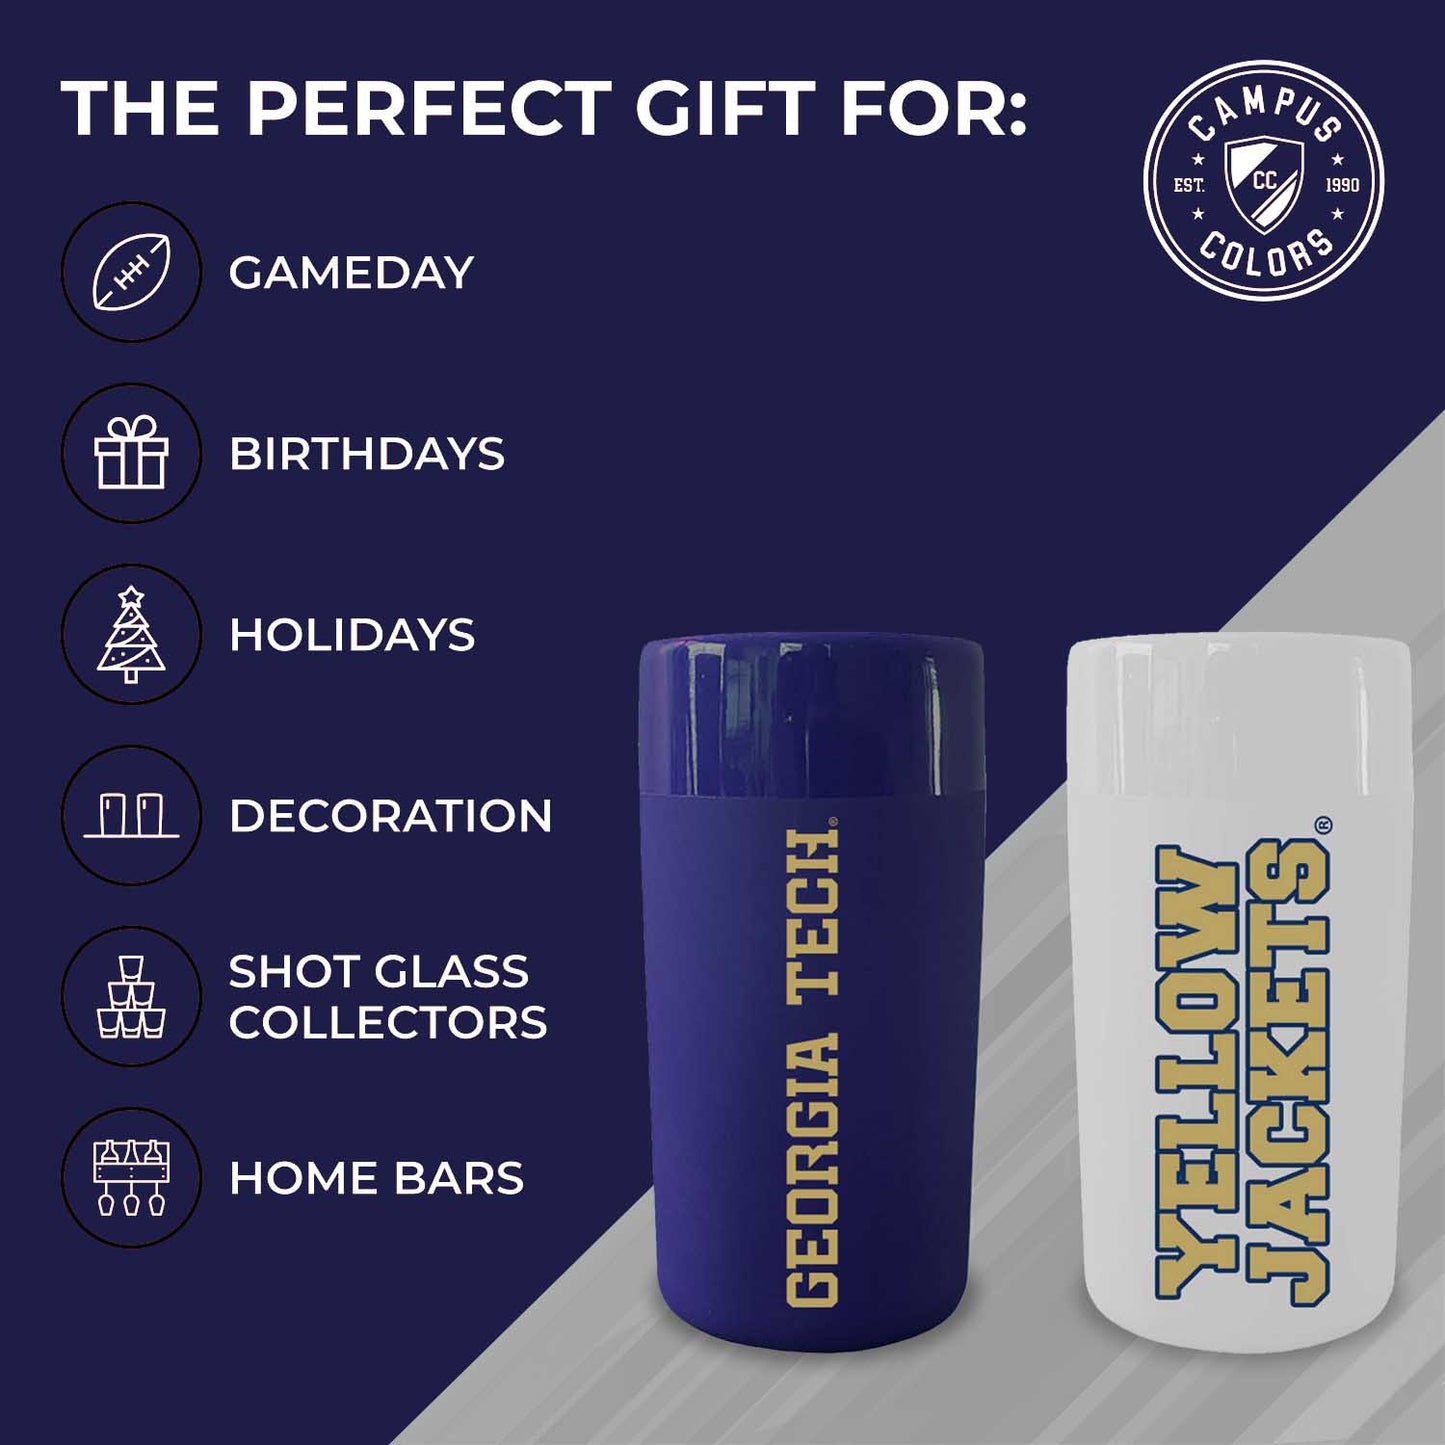 Georgia Tech Yellowjackets College and University 2-Pack Shot Glasses - Team Color